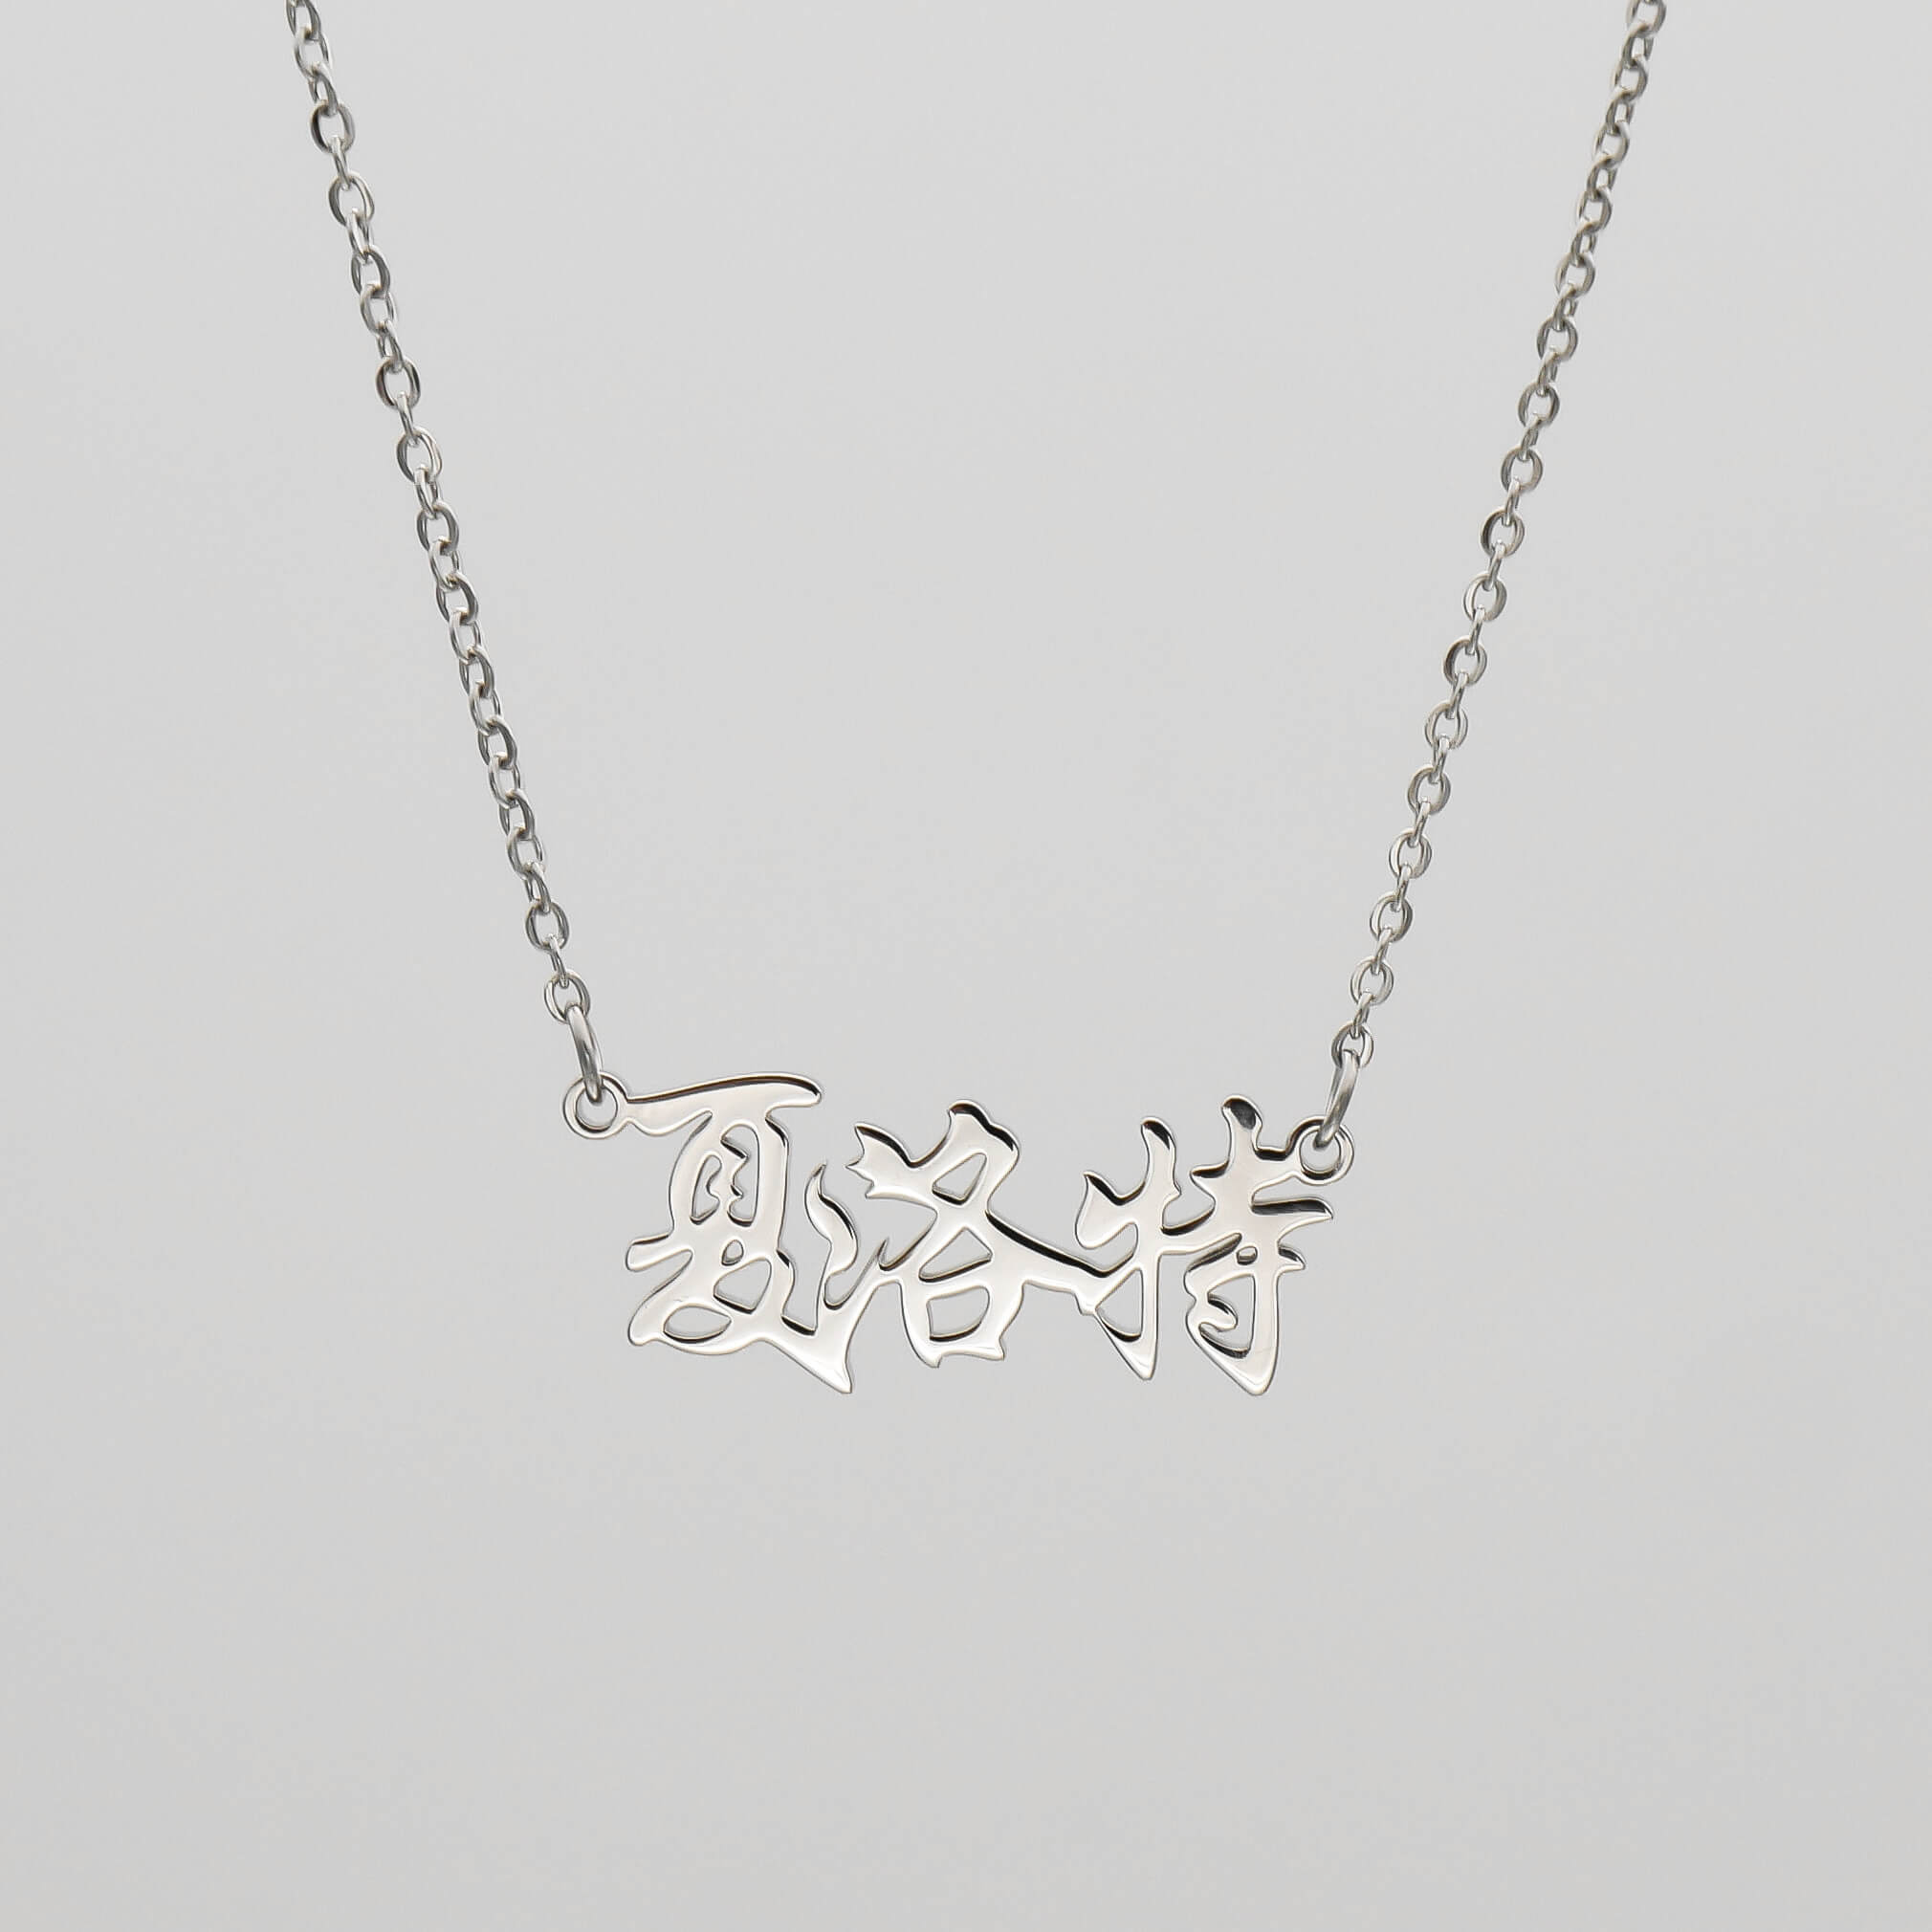 Chinese name necklace | Name necklace in Chinese | PRYA Jewellery UK